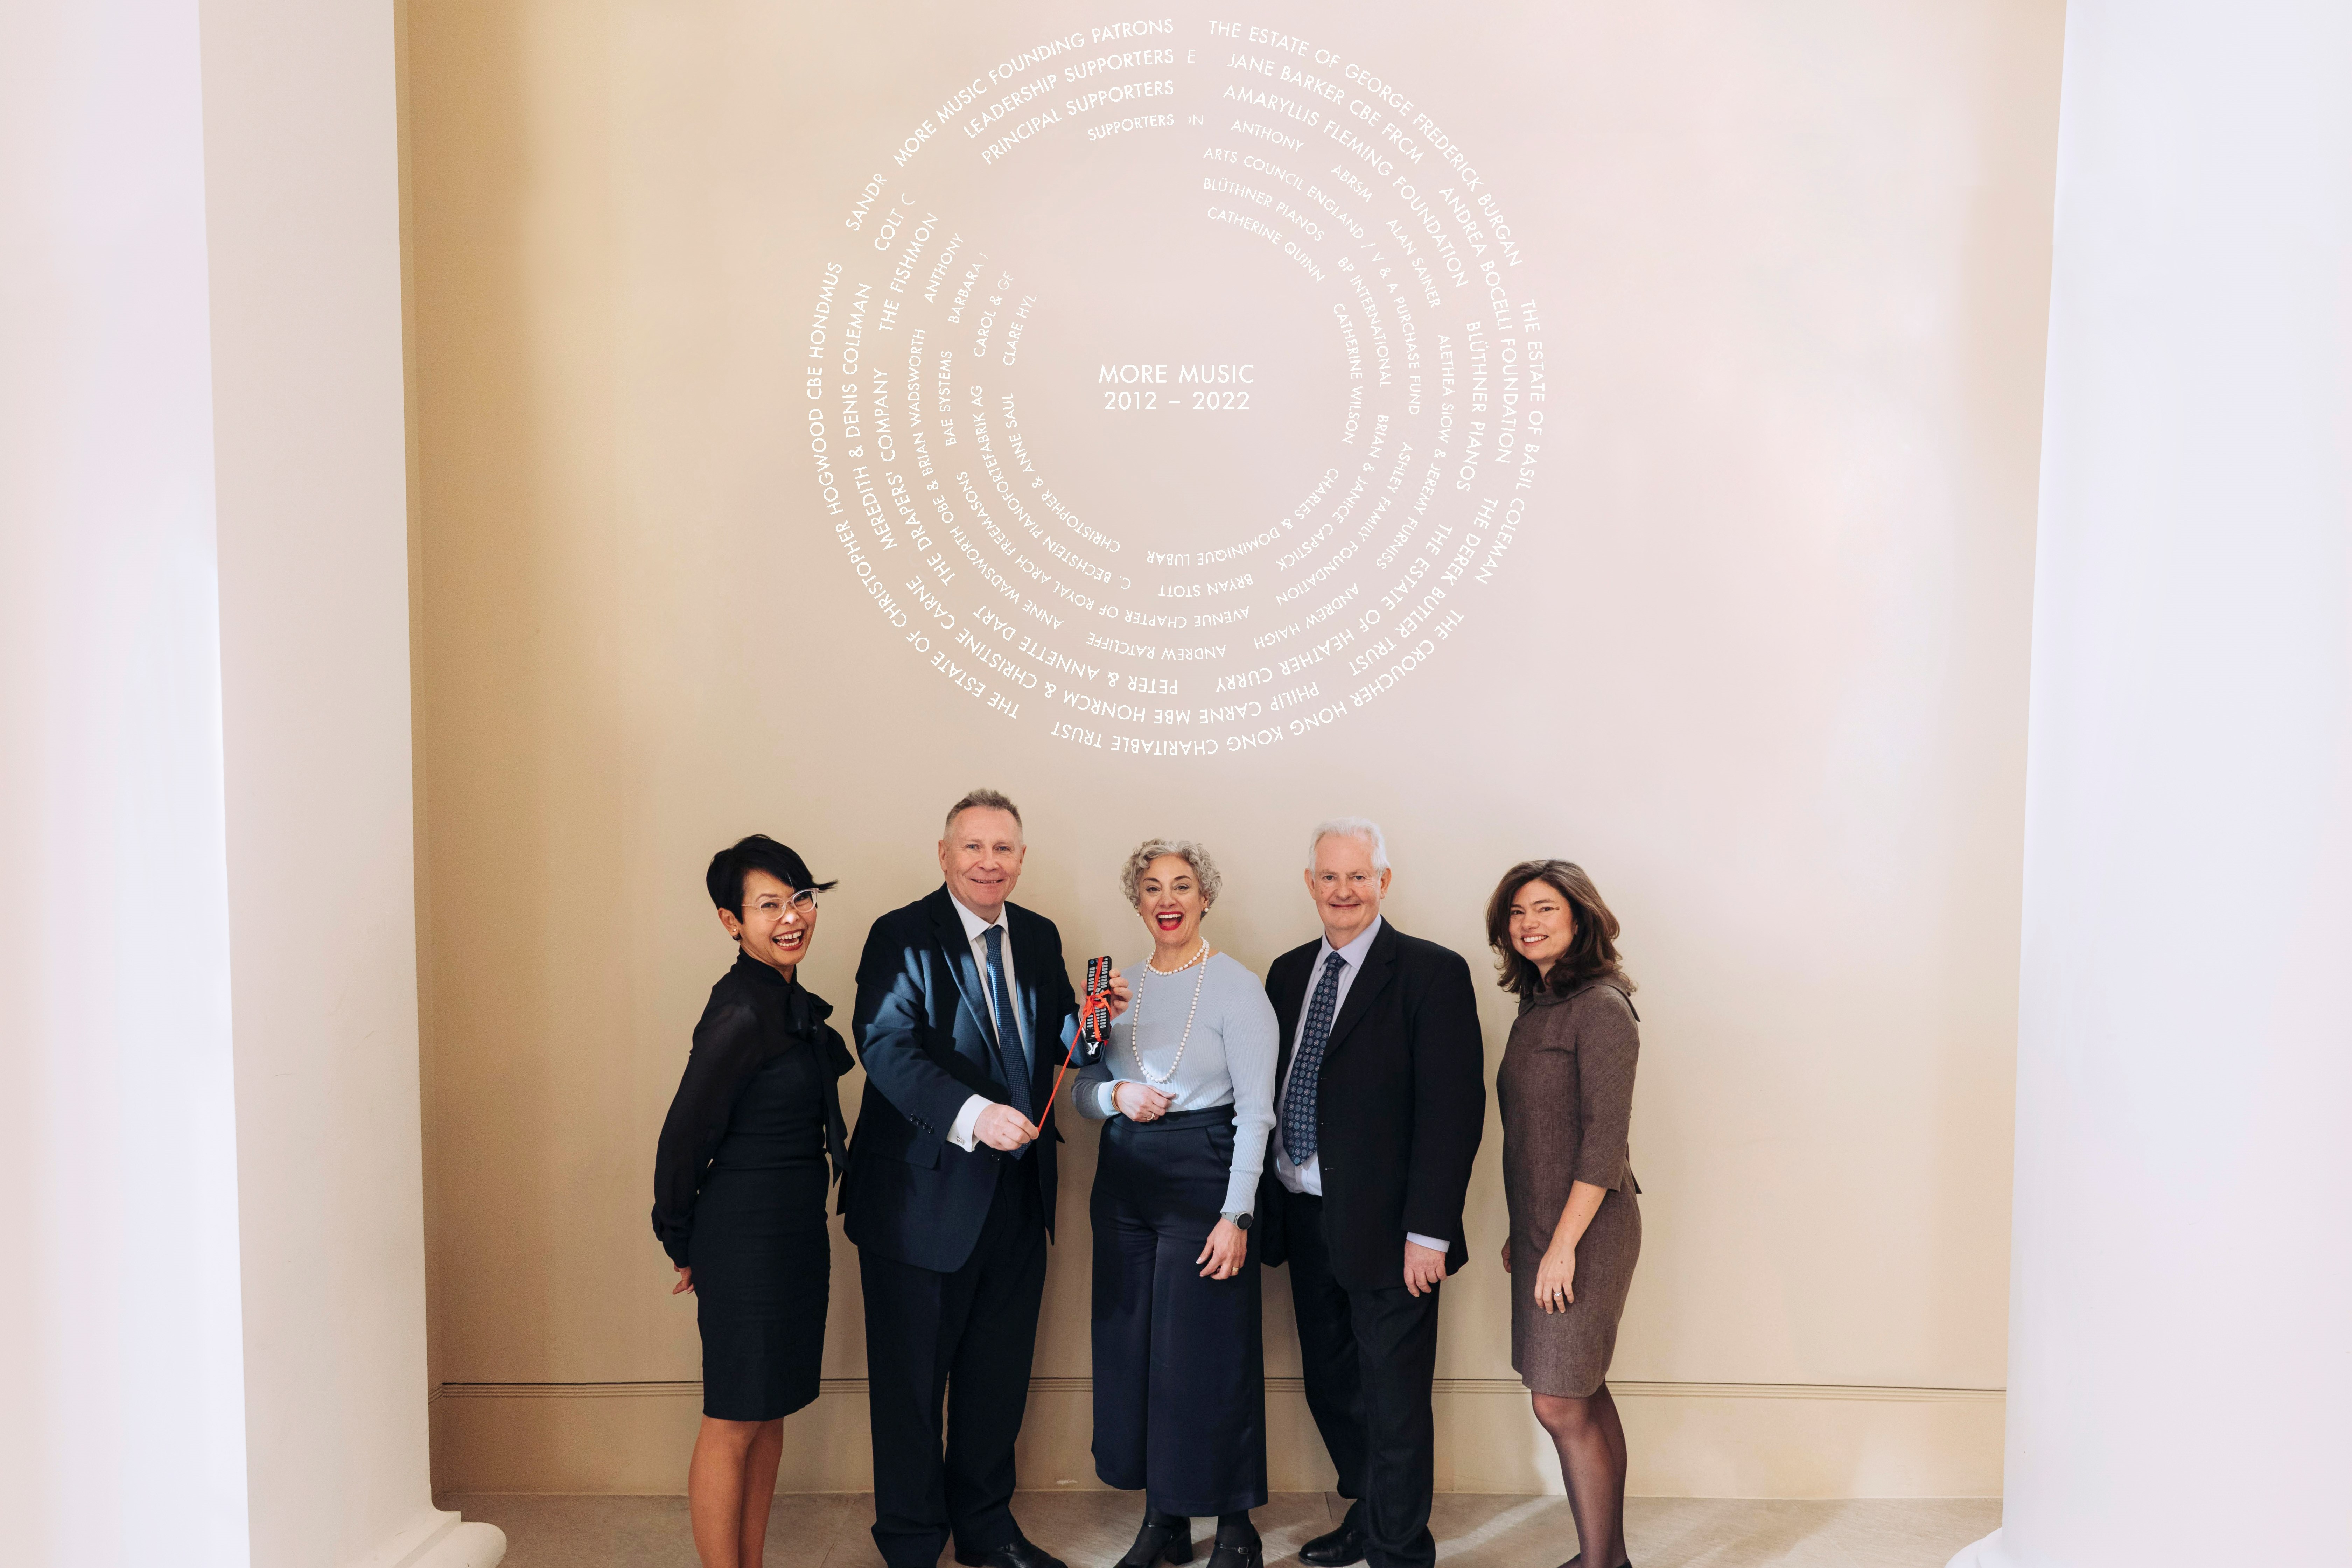 Members of staff stood in front of the new More Music Donor Recognition, a projection of names against a wall, of the RCM’s café.